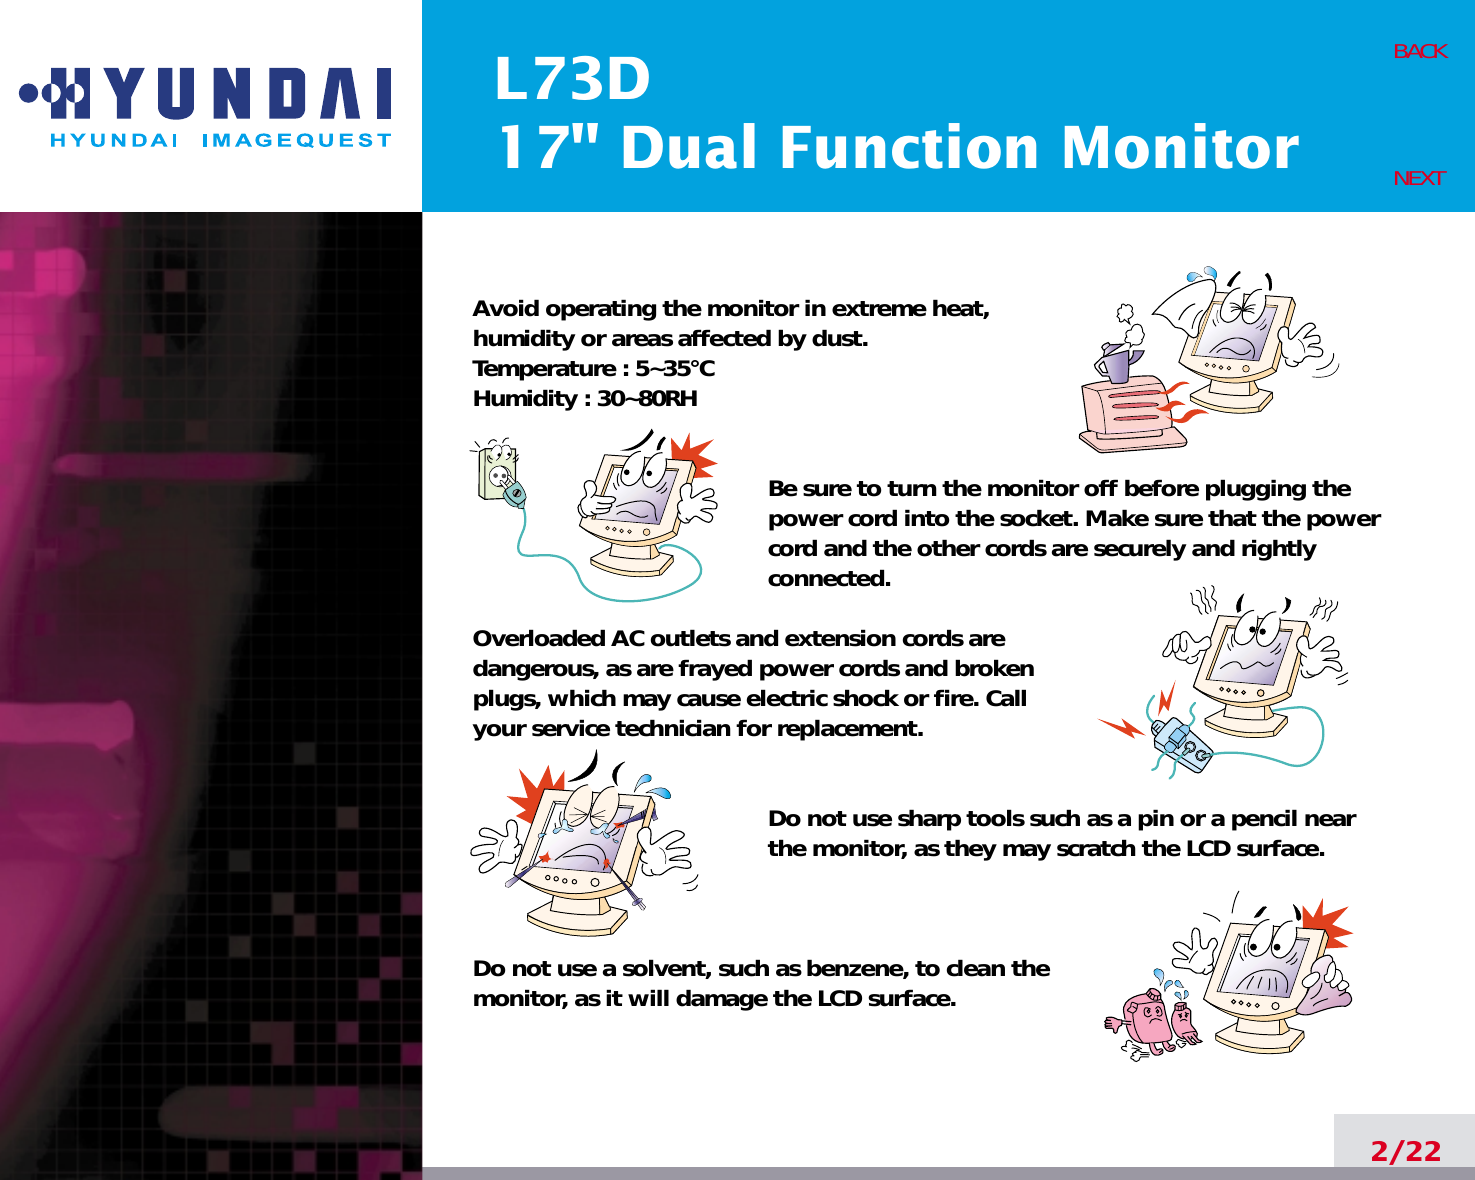 L73D17&quot; Dual Function Monitor2/22BACKNEXTAvoid operating the monitor in extreme heat, humidity or areas affected by dust. Temperature : 5~35°CHumidity : 30~80RH Be sure to turn the monitor off before plugging thepower cord into the socket. Make sure that the powercord and the other cords are securely and rightlyconnected.Overloaded AC outlets and extension cords are dangerous, as are frayed power cords and broken plugs, which may cause electric shock or fire. Call your service technician for replacement.Do not use sharp tools such as a pin or a pencil near the monitor, as they may scratch the LCD surface.Do not use a solvent, such as benzene, to clean the monitor, as it will damage the LCD surface.